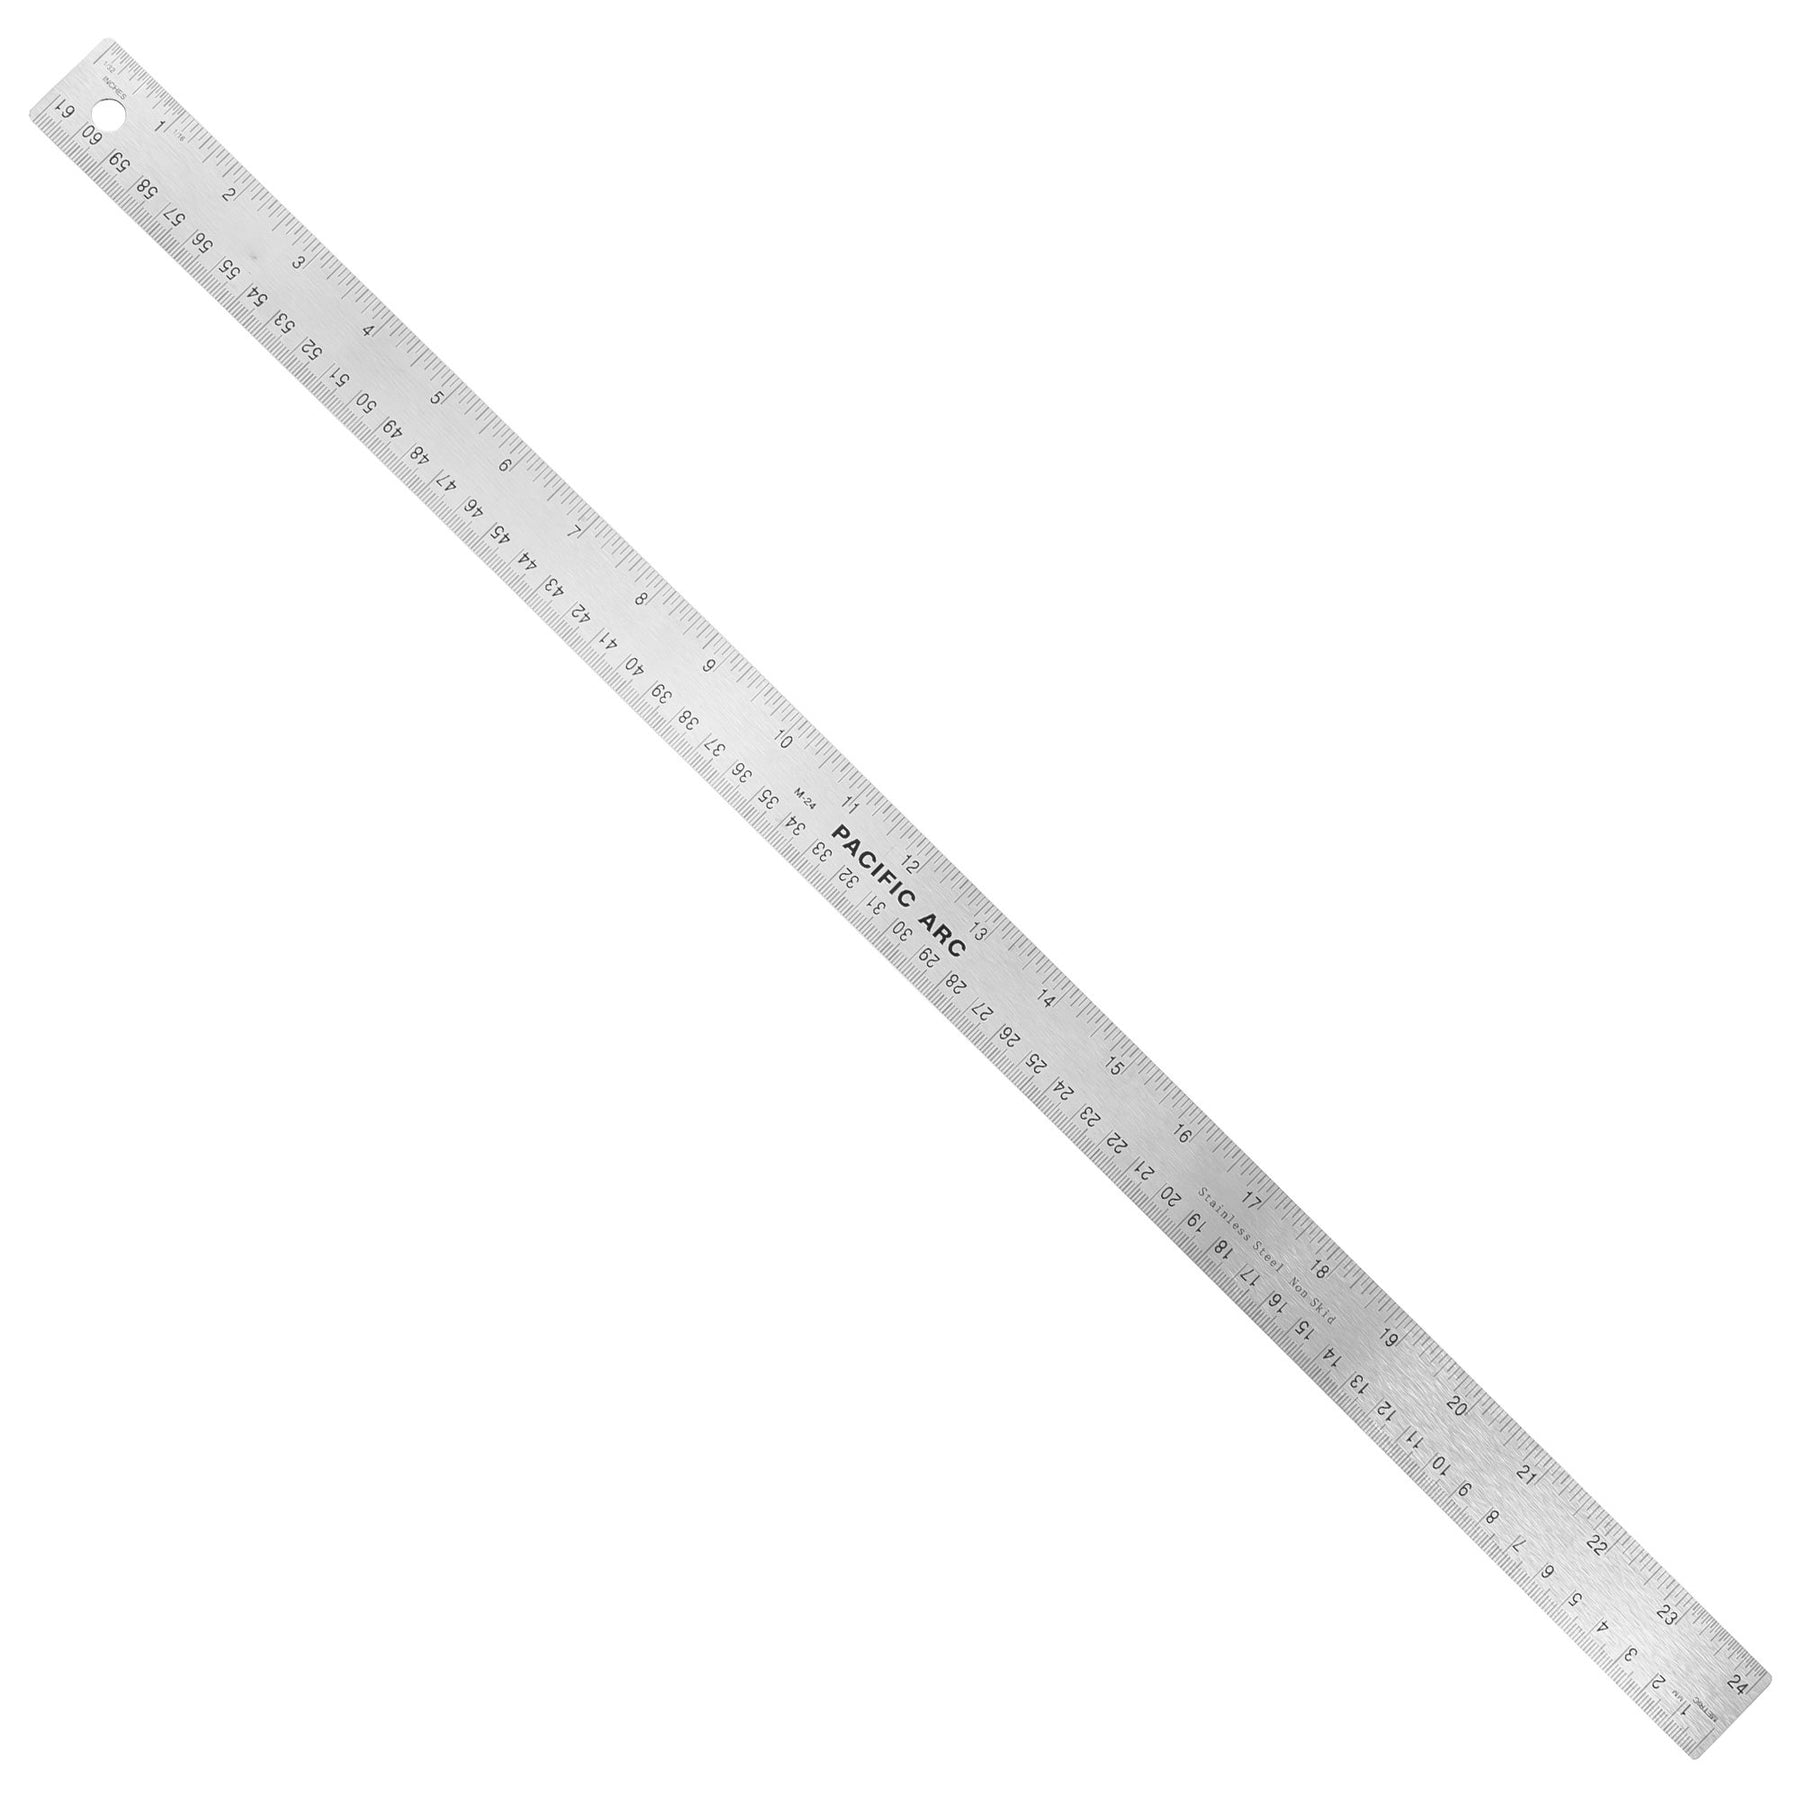 Stainless Steel Corked back Ruler 24 - MICA Store